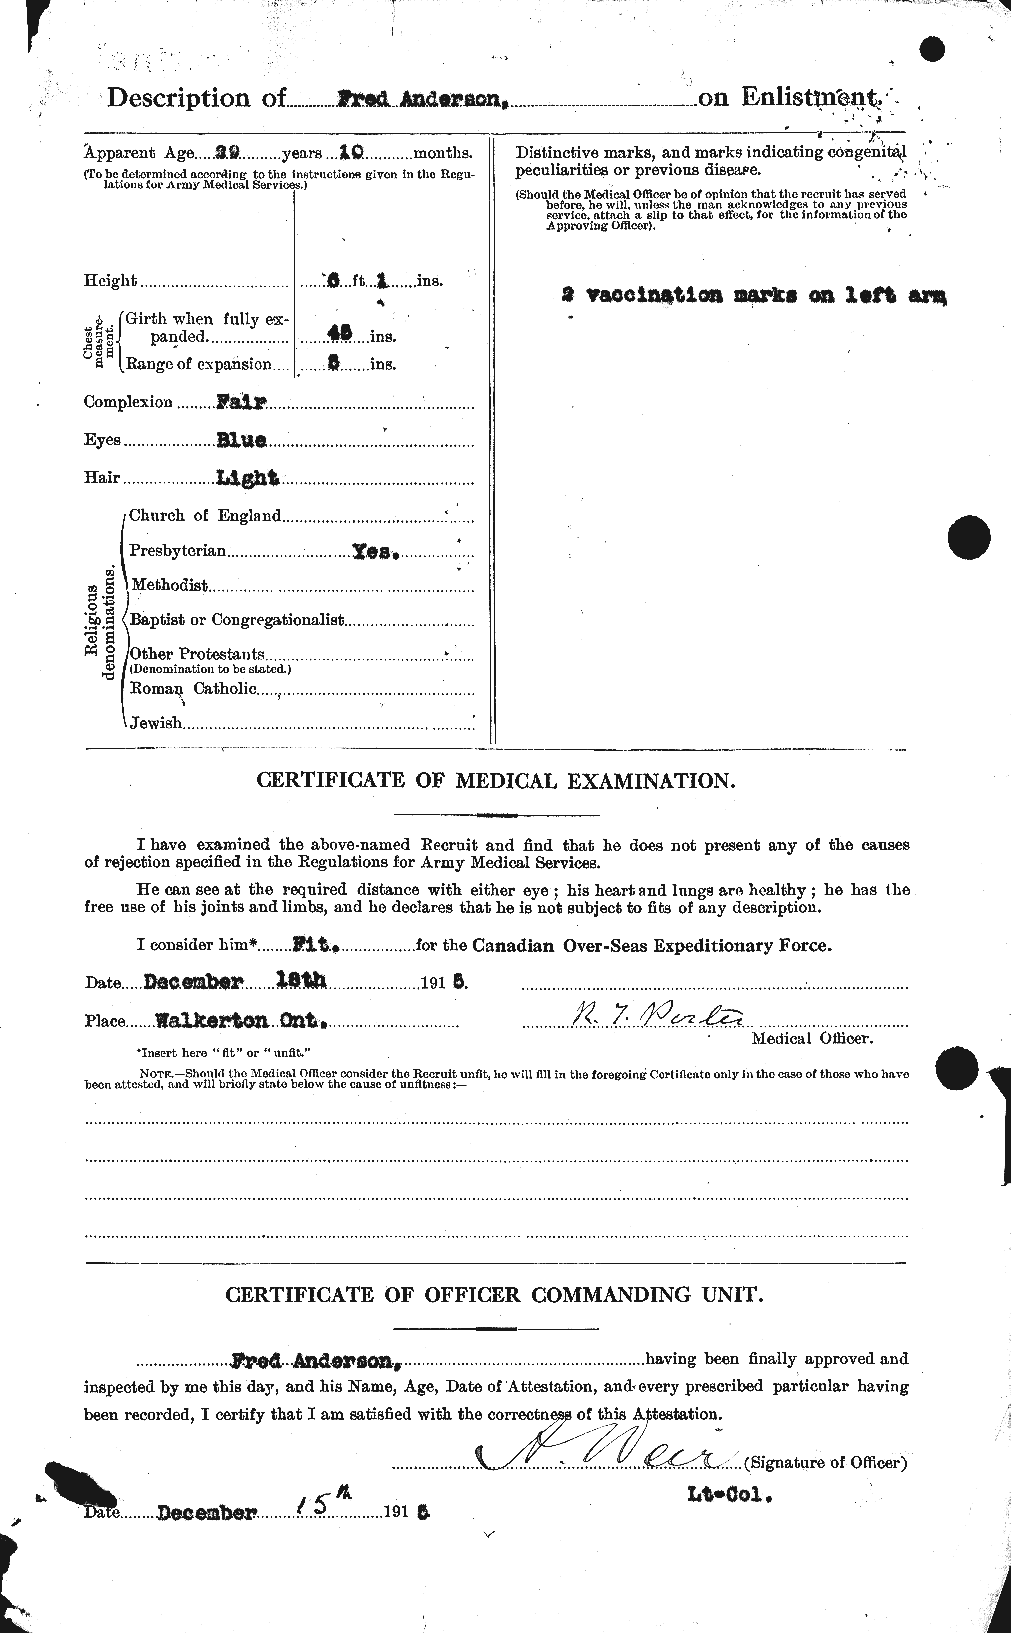 Personnel Records of the First World War - CEF 209838b